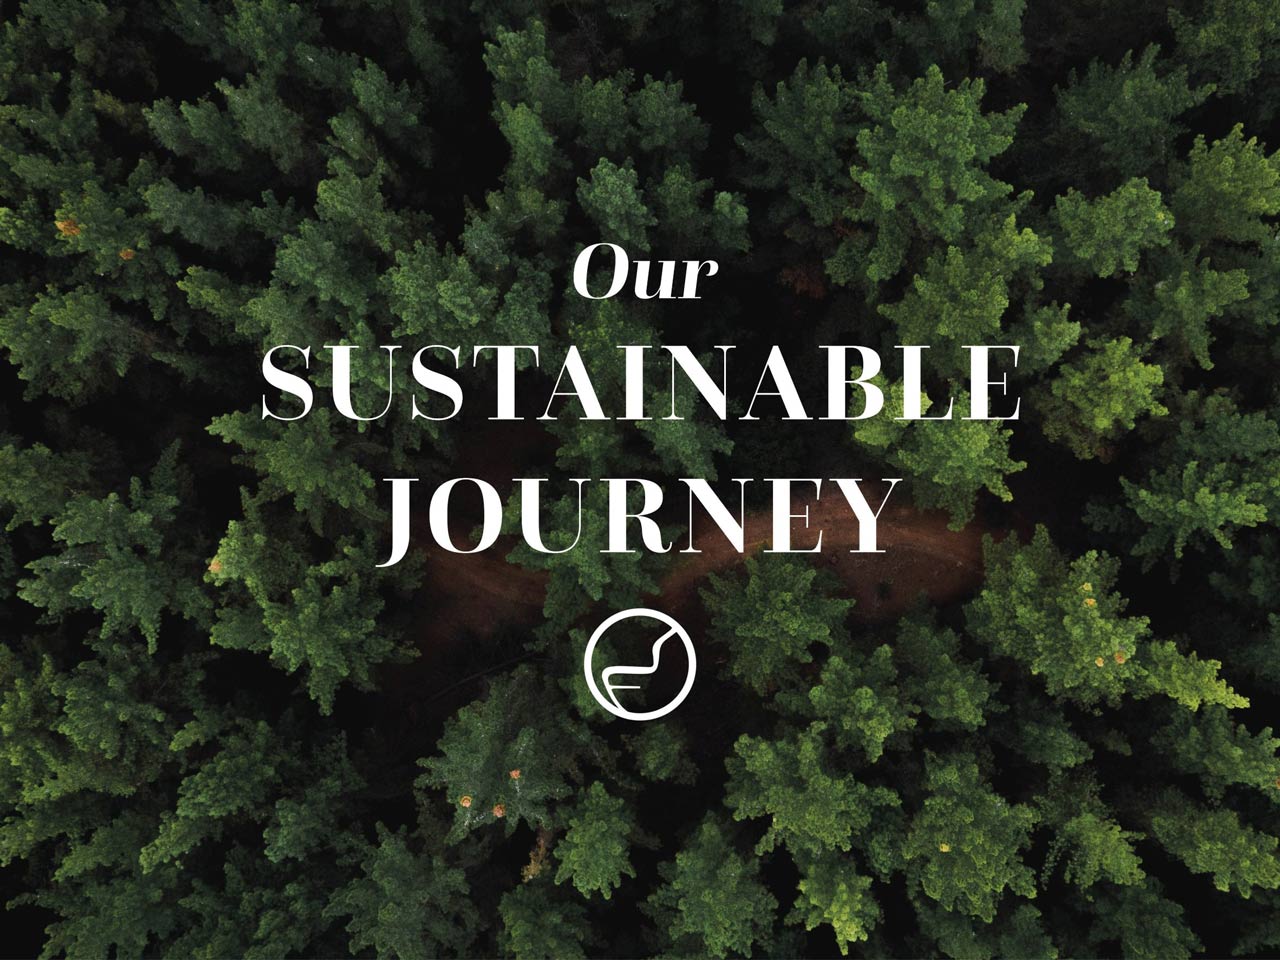 Our sustainable journey